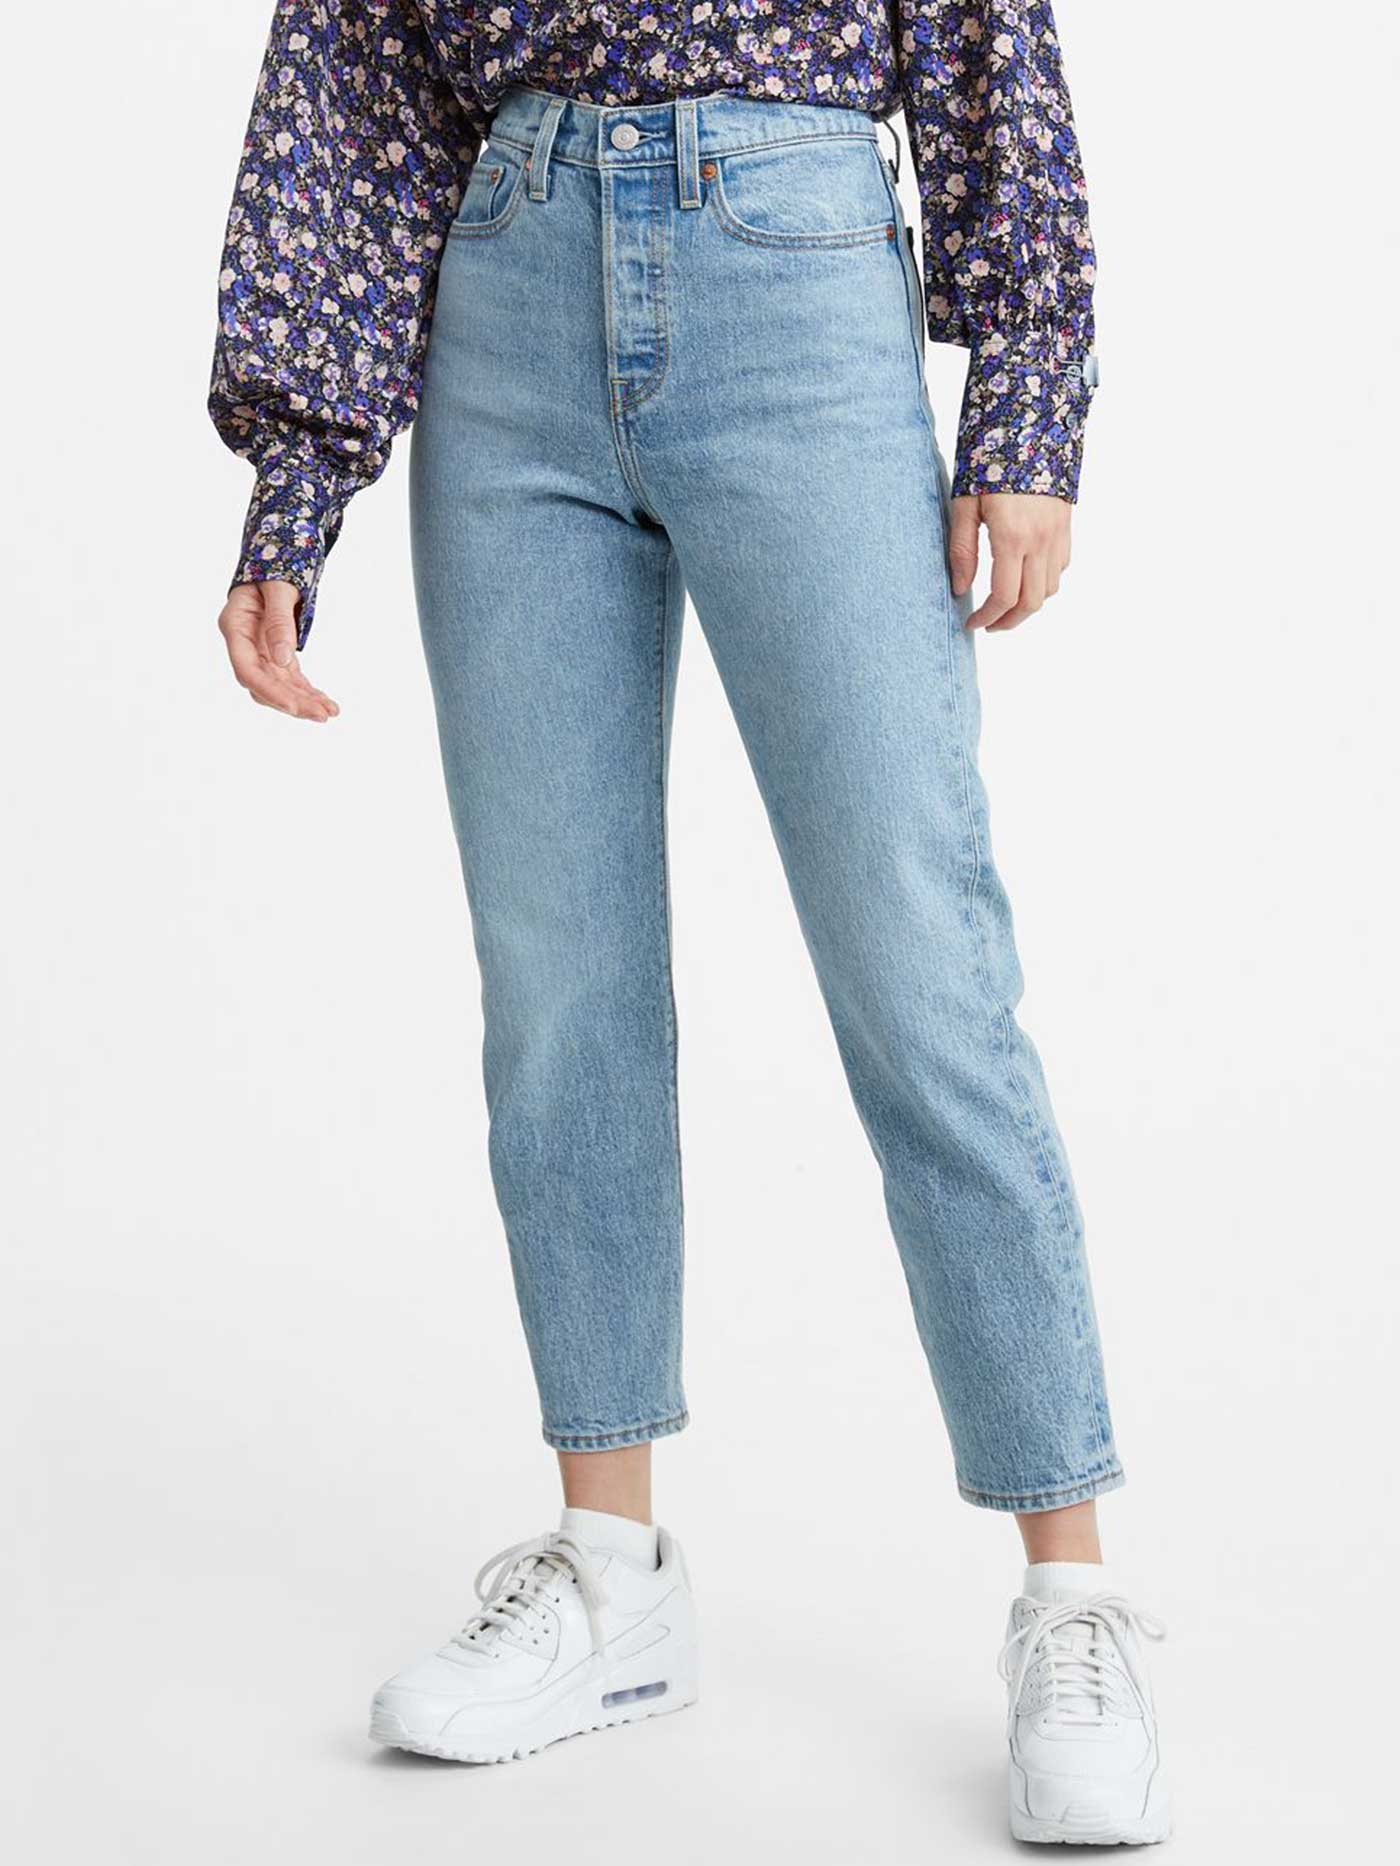 Levis Wedgie Ankle Fit Jeans